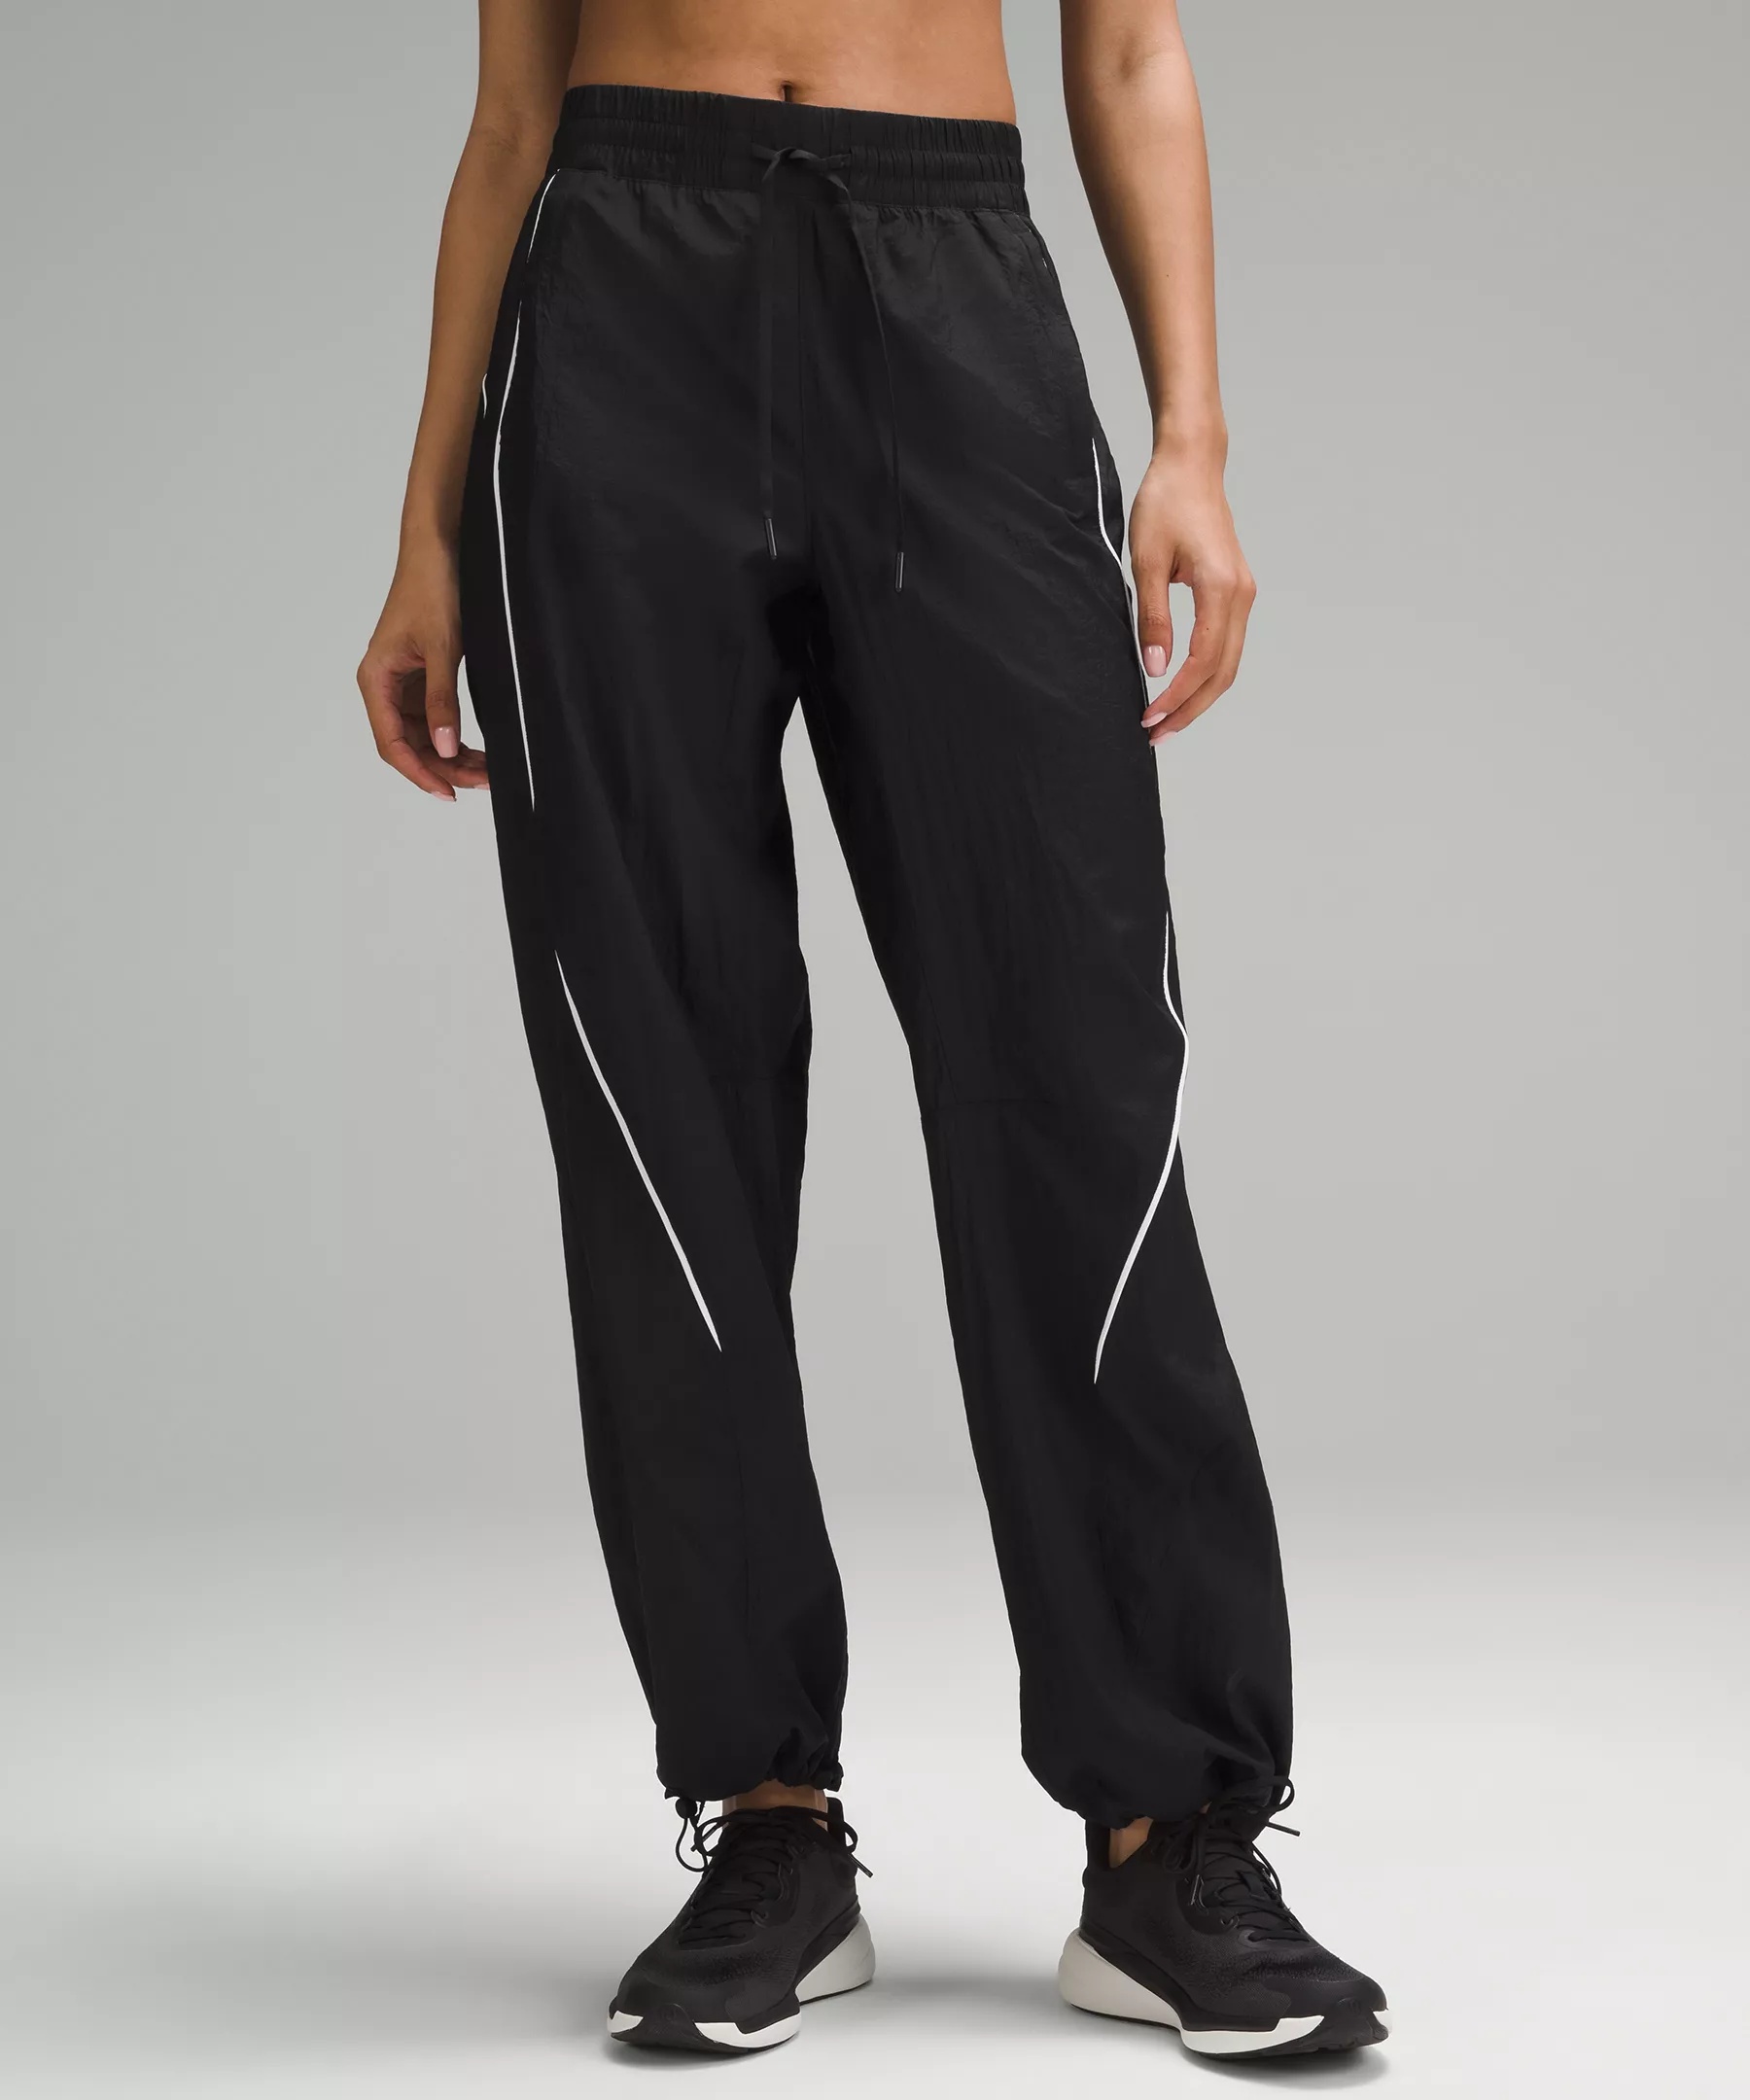 License to Train Mid-Rise Lightweight Jogger - 1